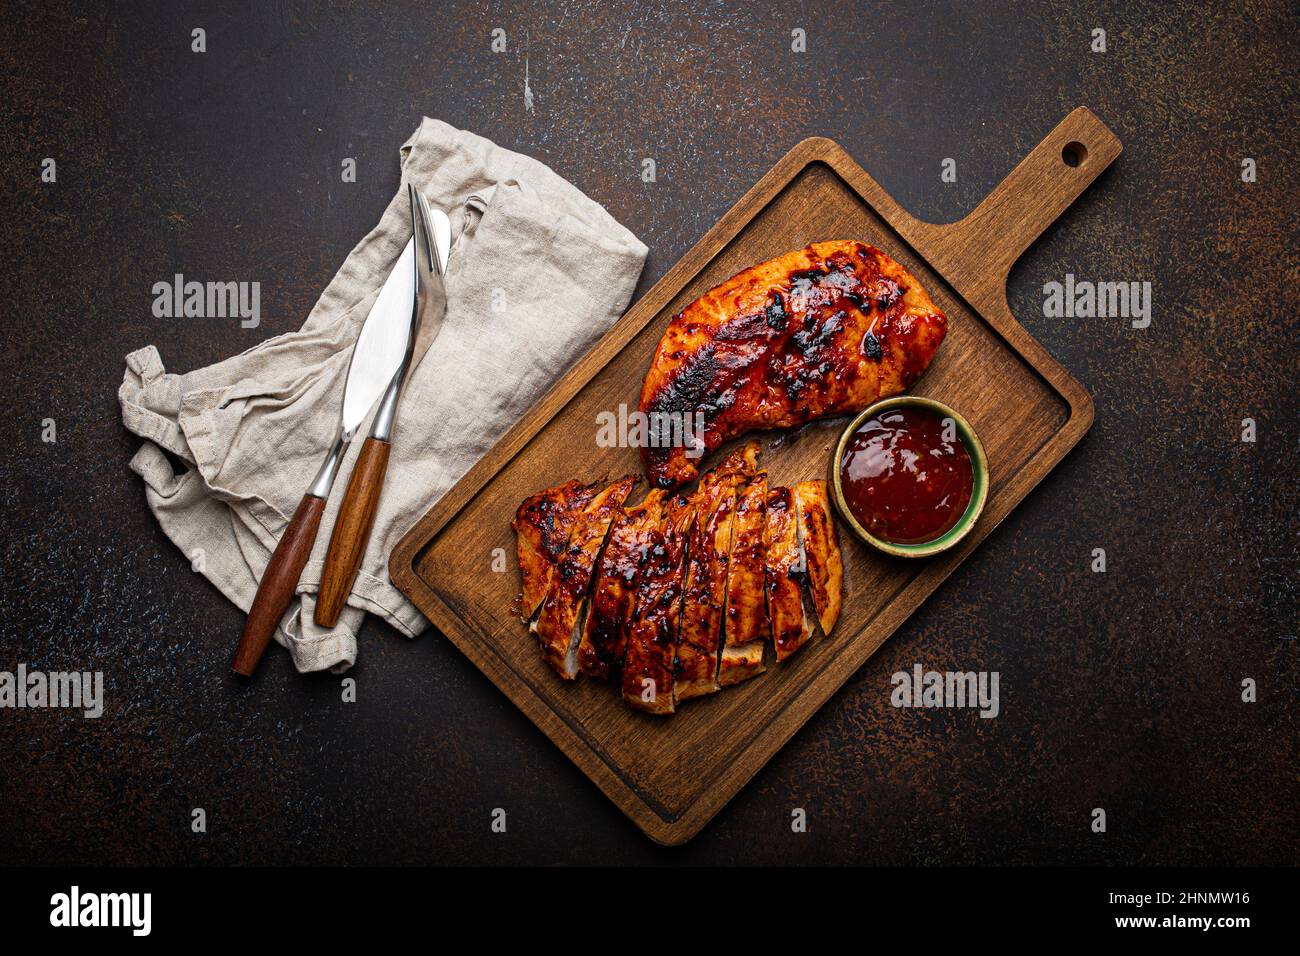 Grilled turkey or chicken fillet with red sauce served and sliced on wooden cutting board Stock Photo